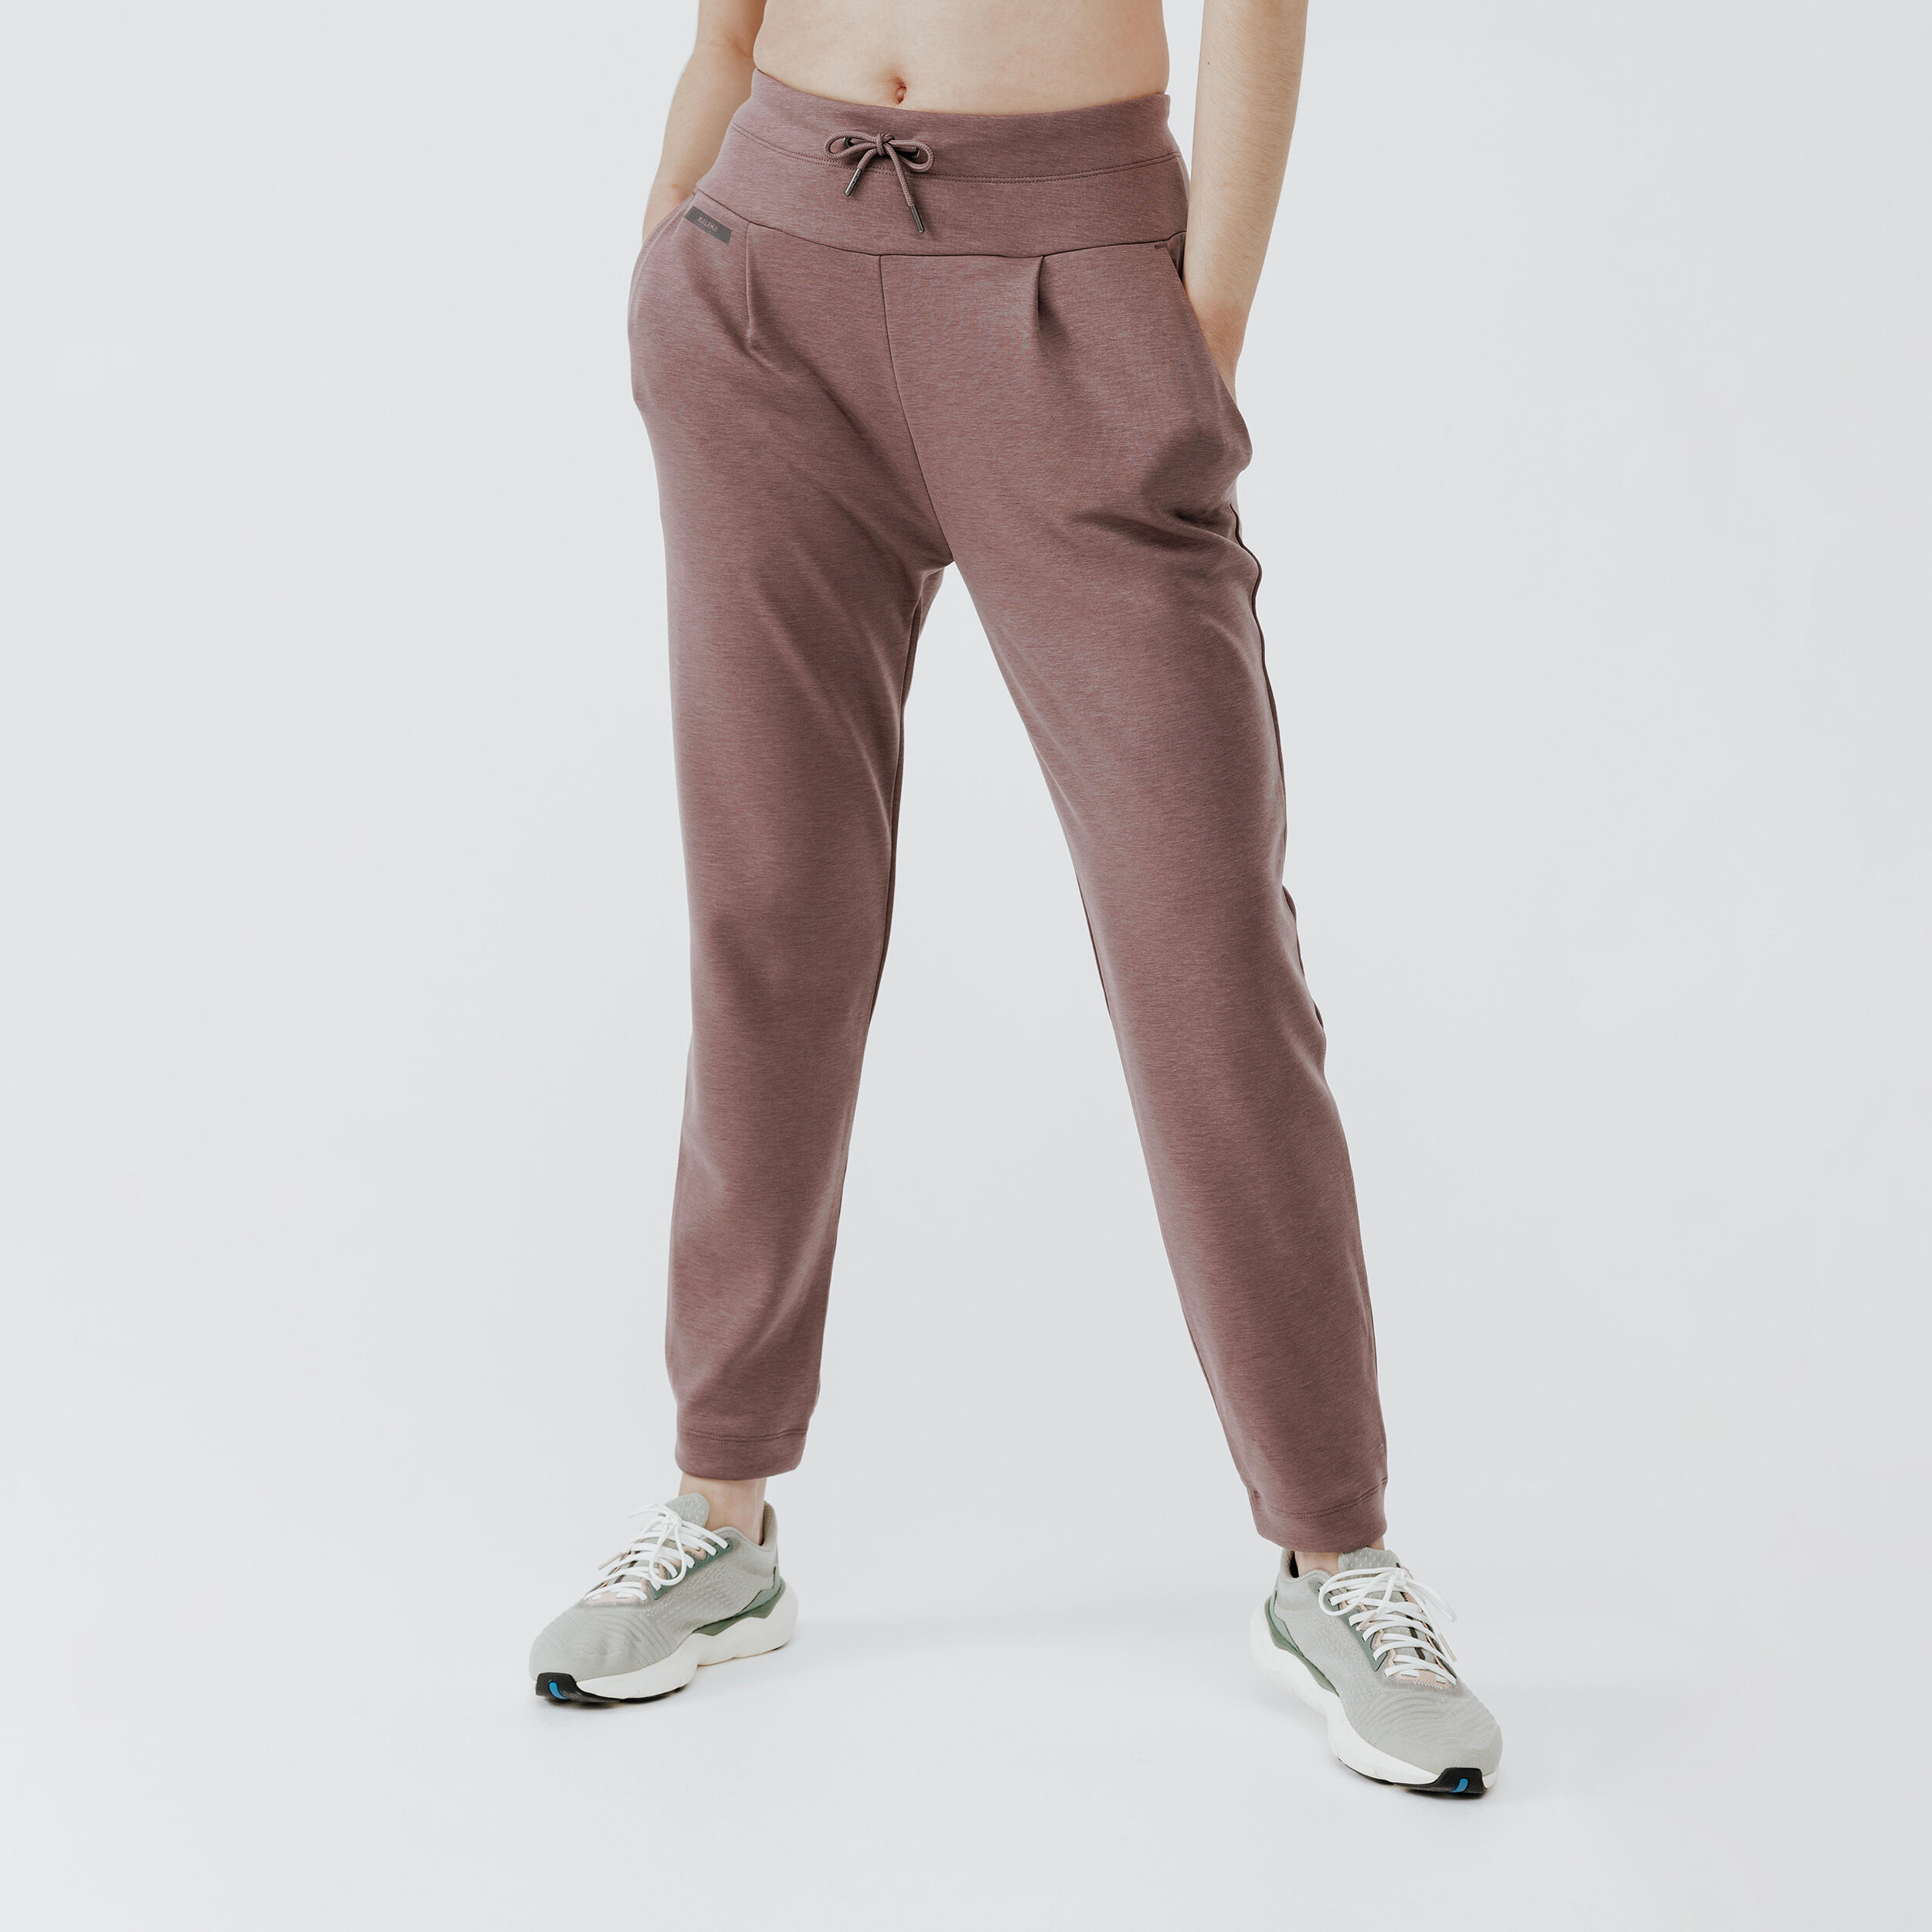 WARM PANTS For Women With High Quality Inner Furry Layer